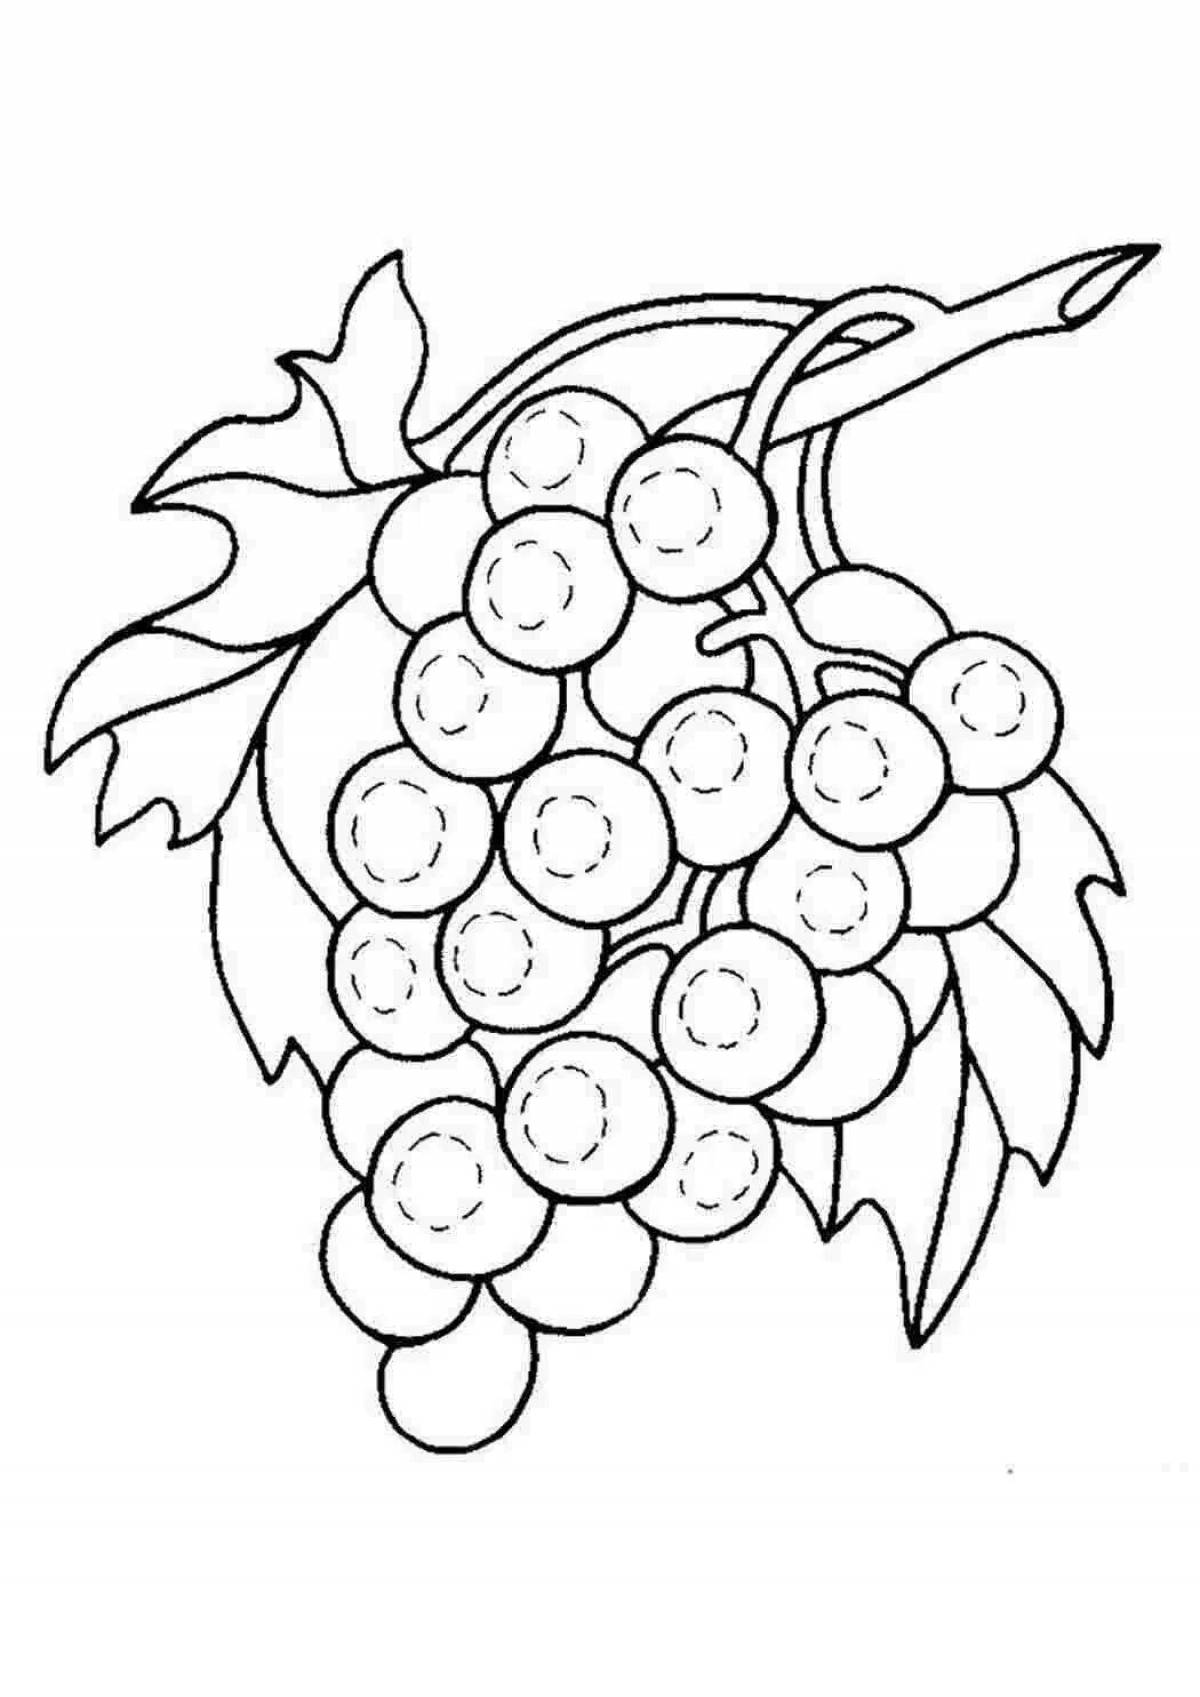 Glowing grapes coloring book for toddlers